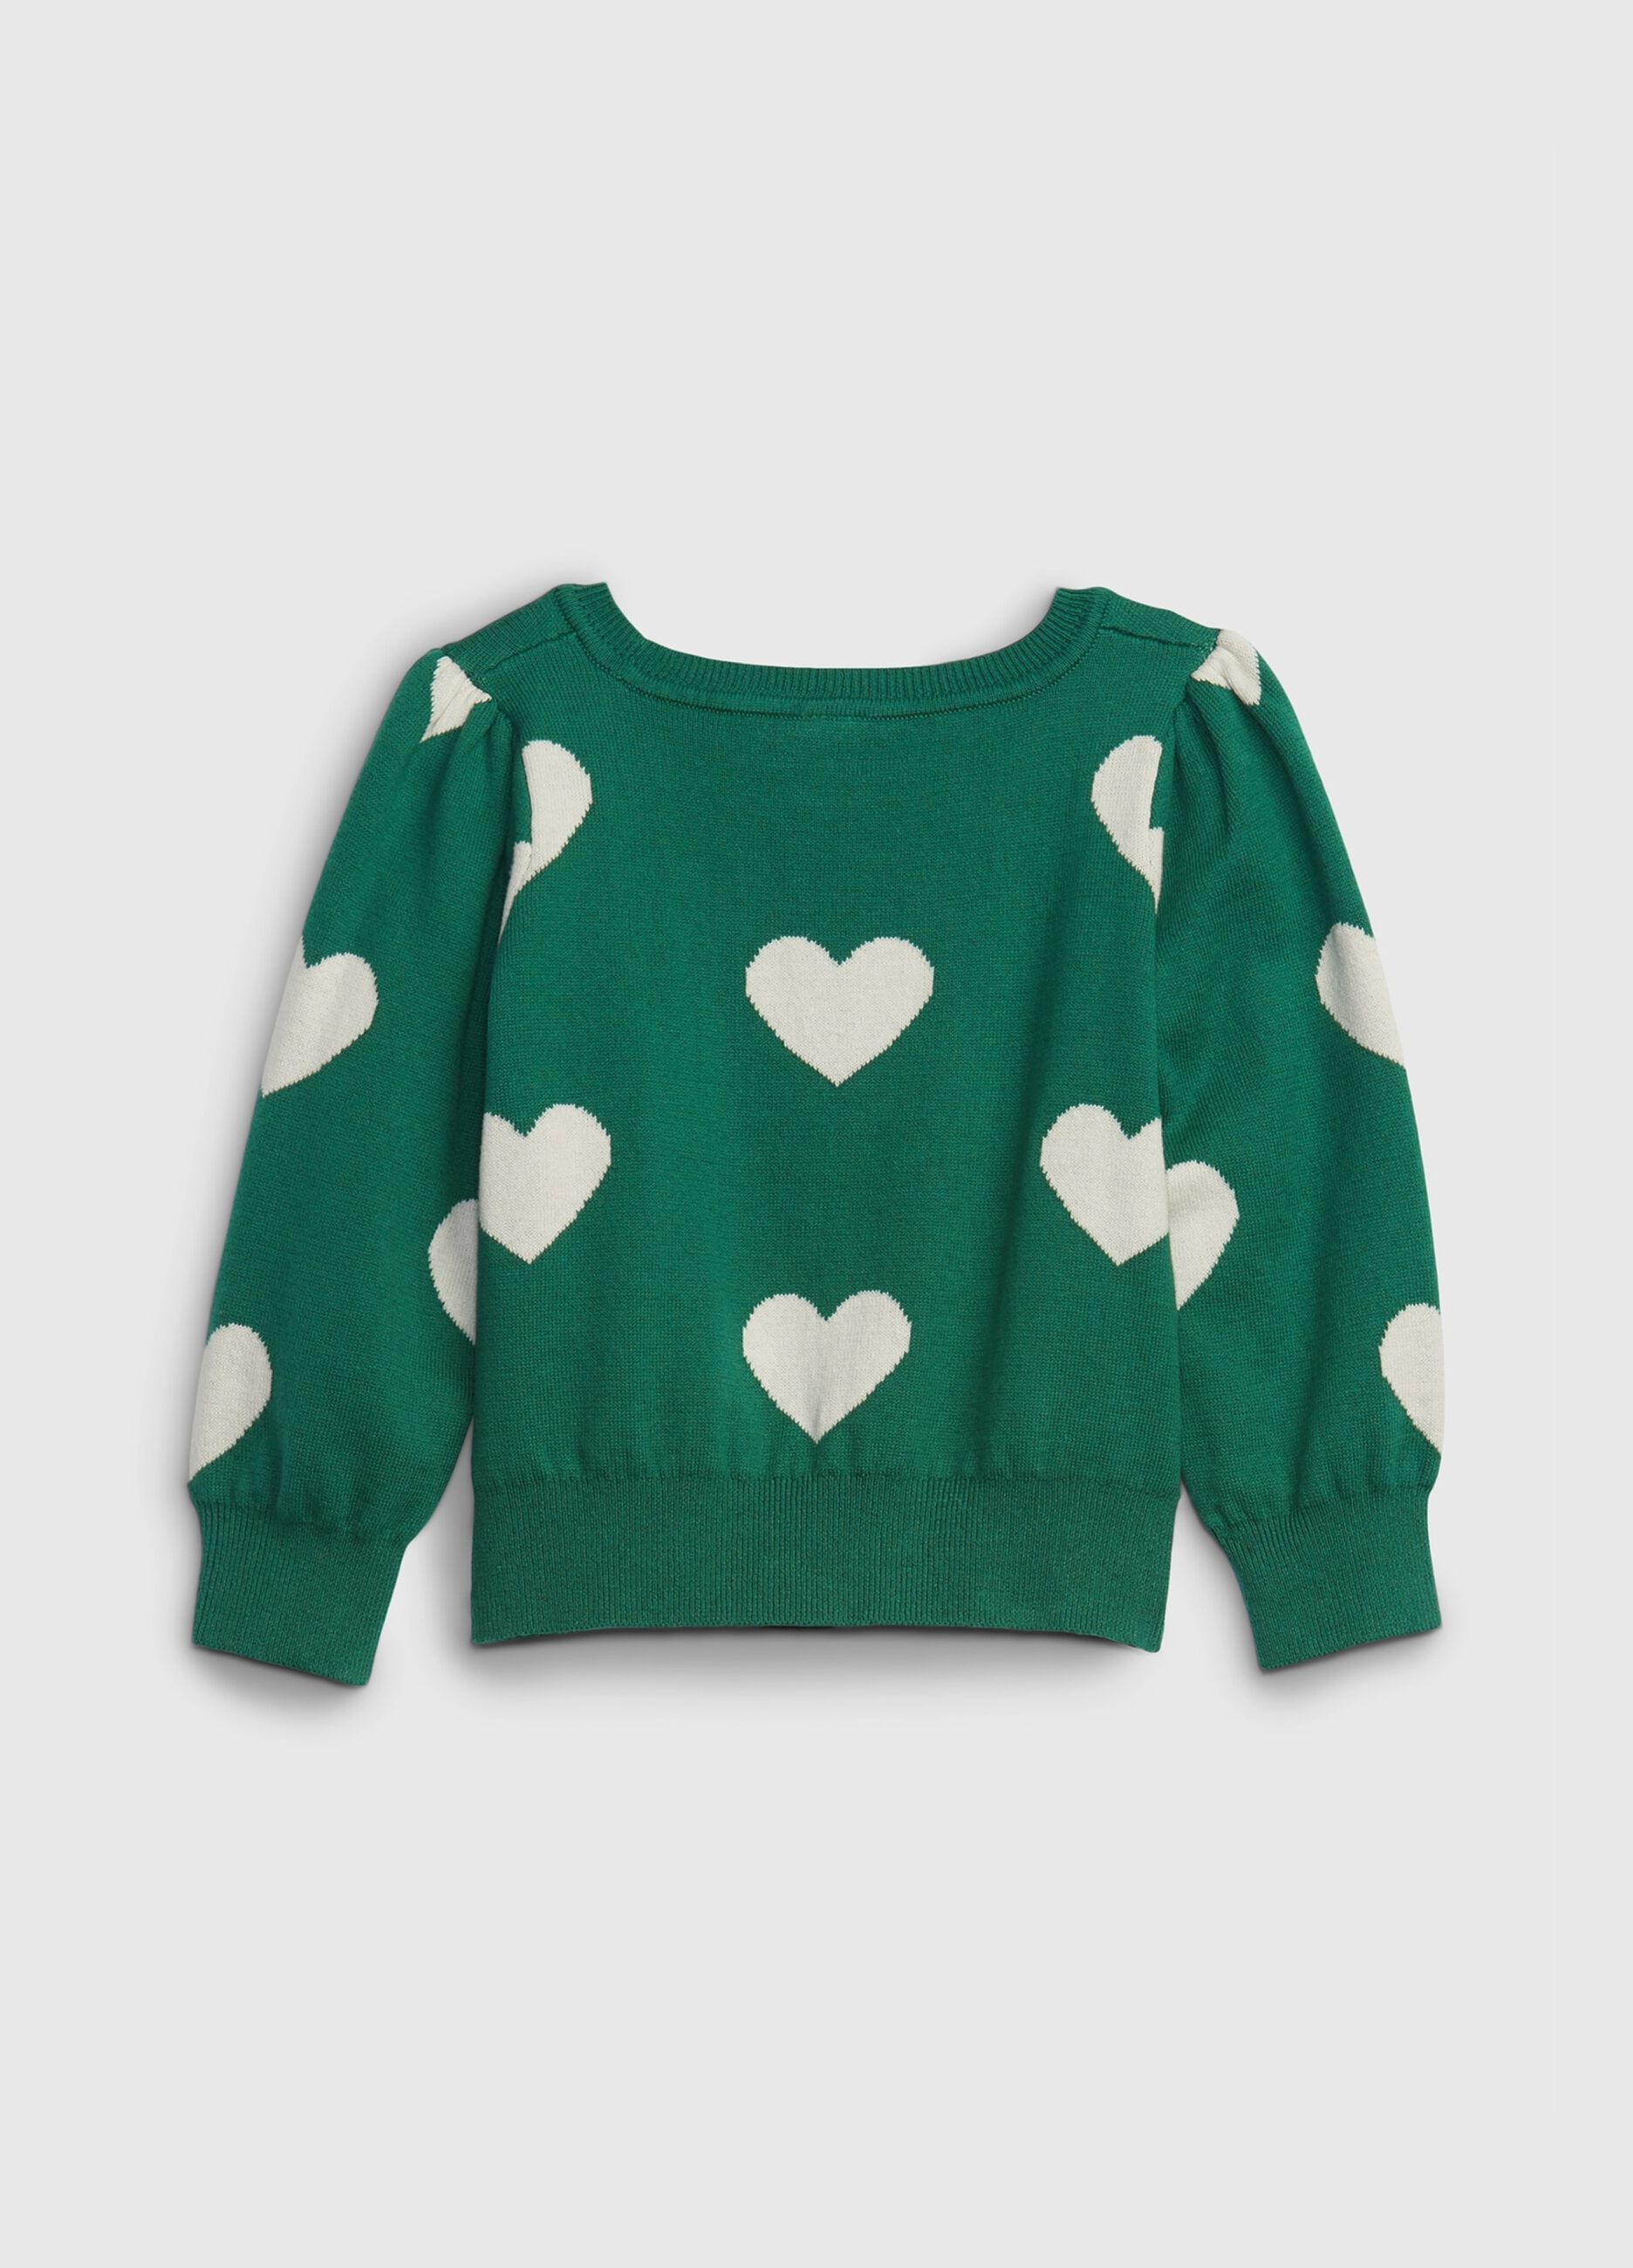 Top with jacquard heart pattern